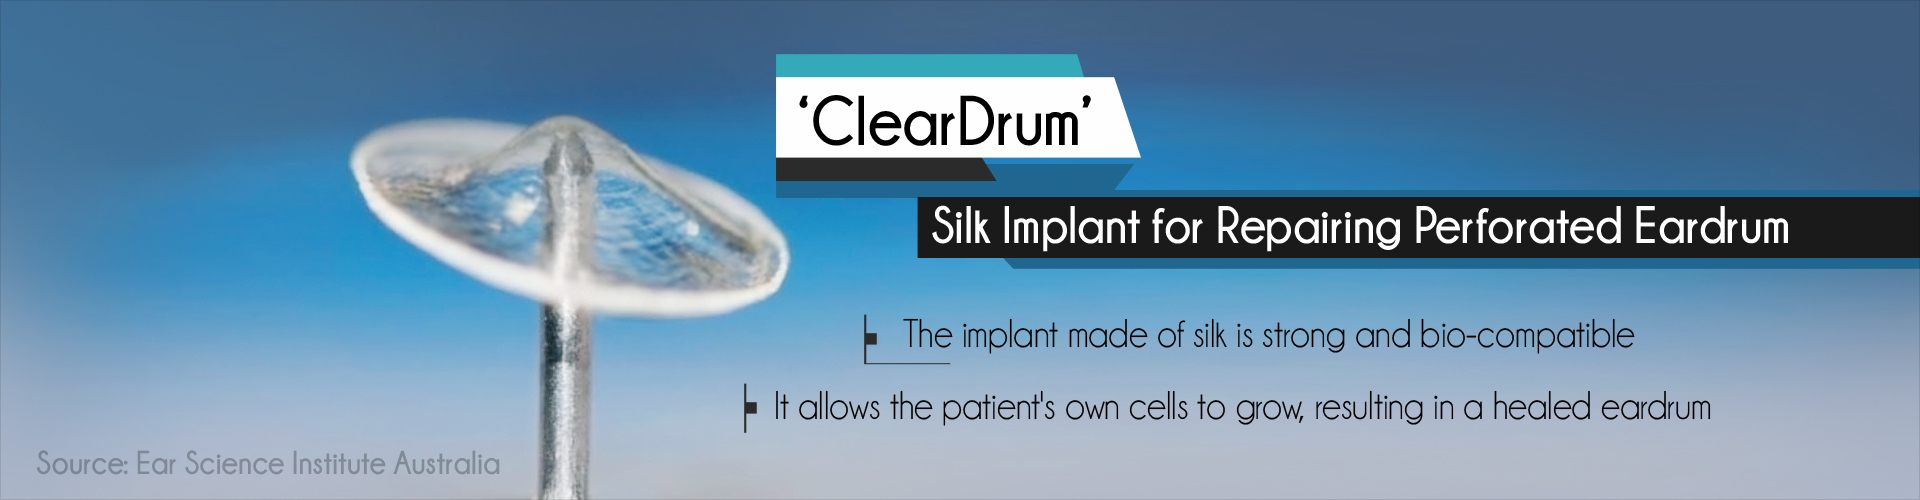 ''ClearDrum'' silk implant for repairing perforated eardrum
- The implant made of silk is strong and bio-compatible
- It allows the patient''s own cells to grow, resulting in a healed eardrum